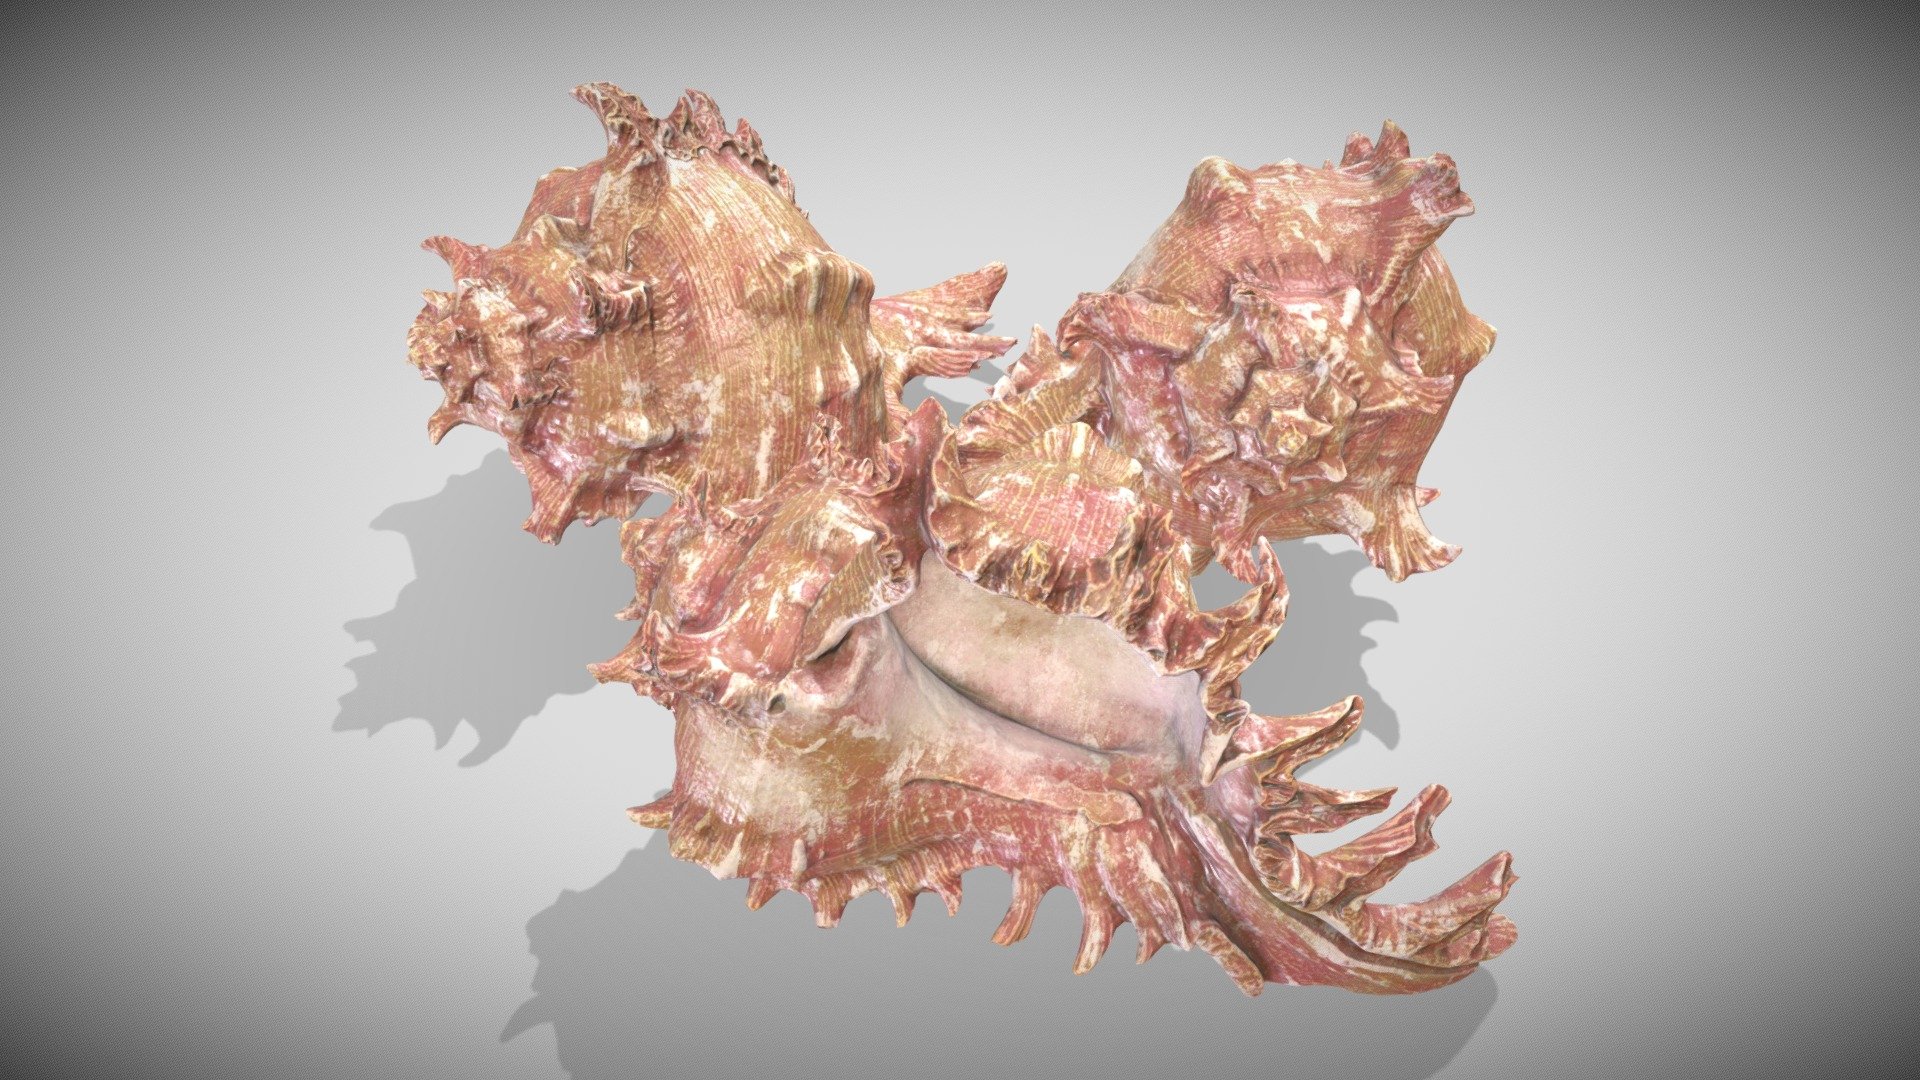 All in One Material Specular Glossiness 4k - Same Object 3 time....
Original 3D Scan from http://threedscans.com/shell/ramose-murex/ - Trio Murex Romosus - Buy Royalty Free 3D model by Francesco Coldesina (@topfrank2013) 3d model